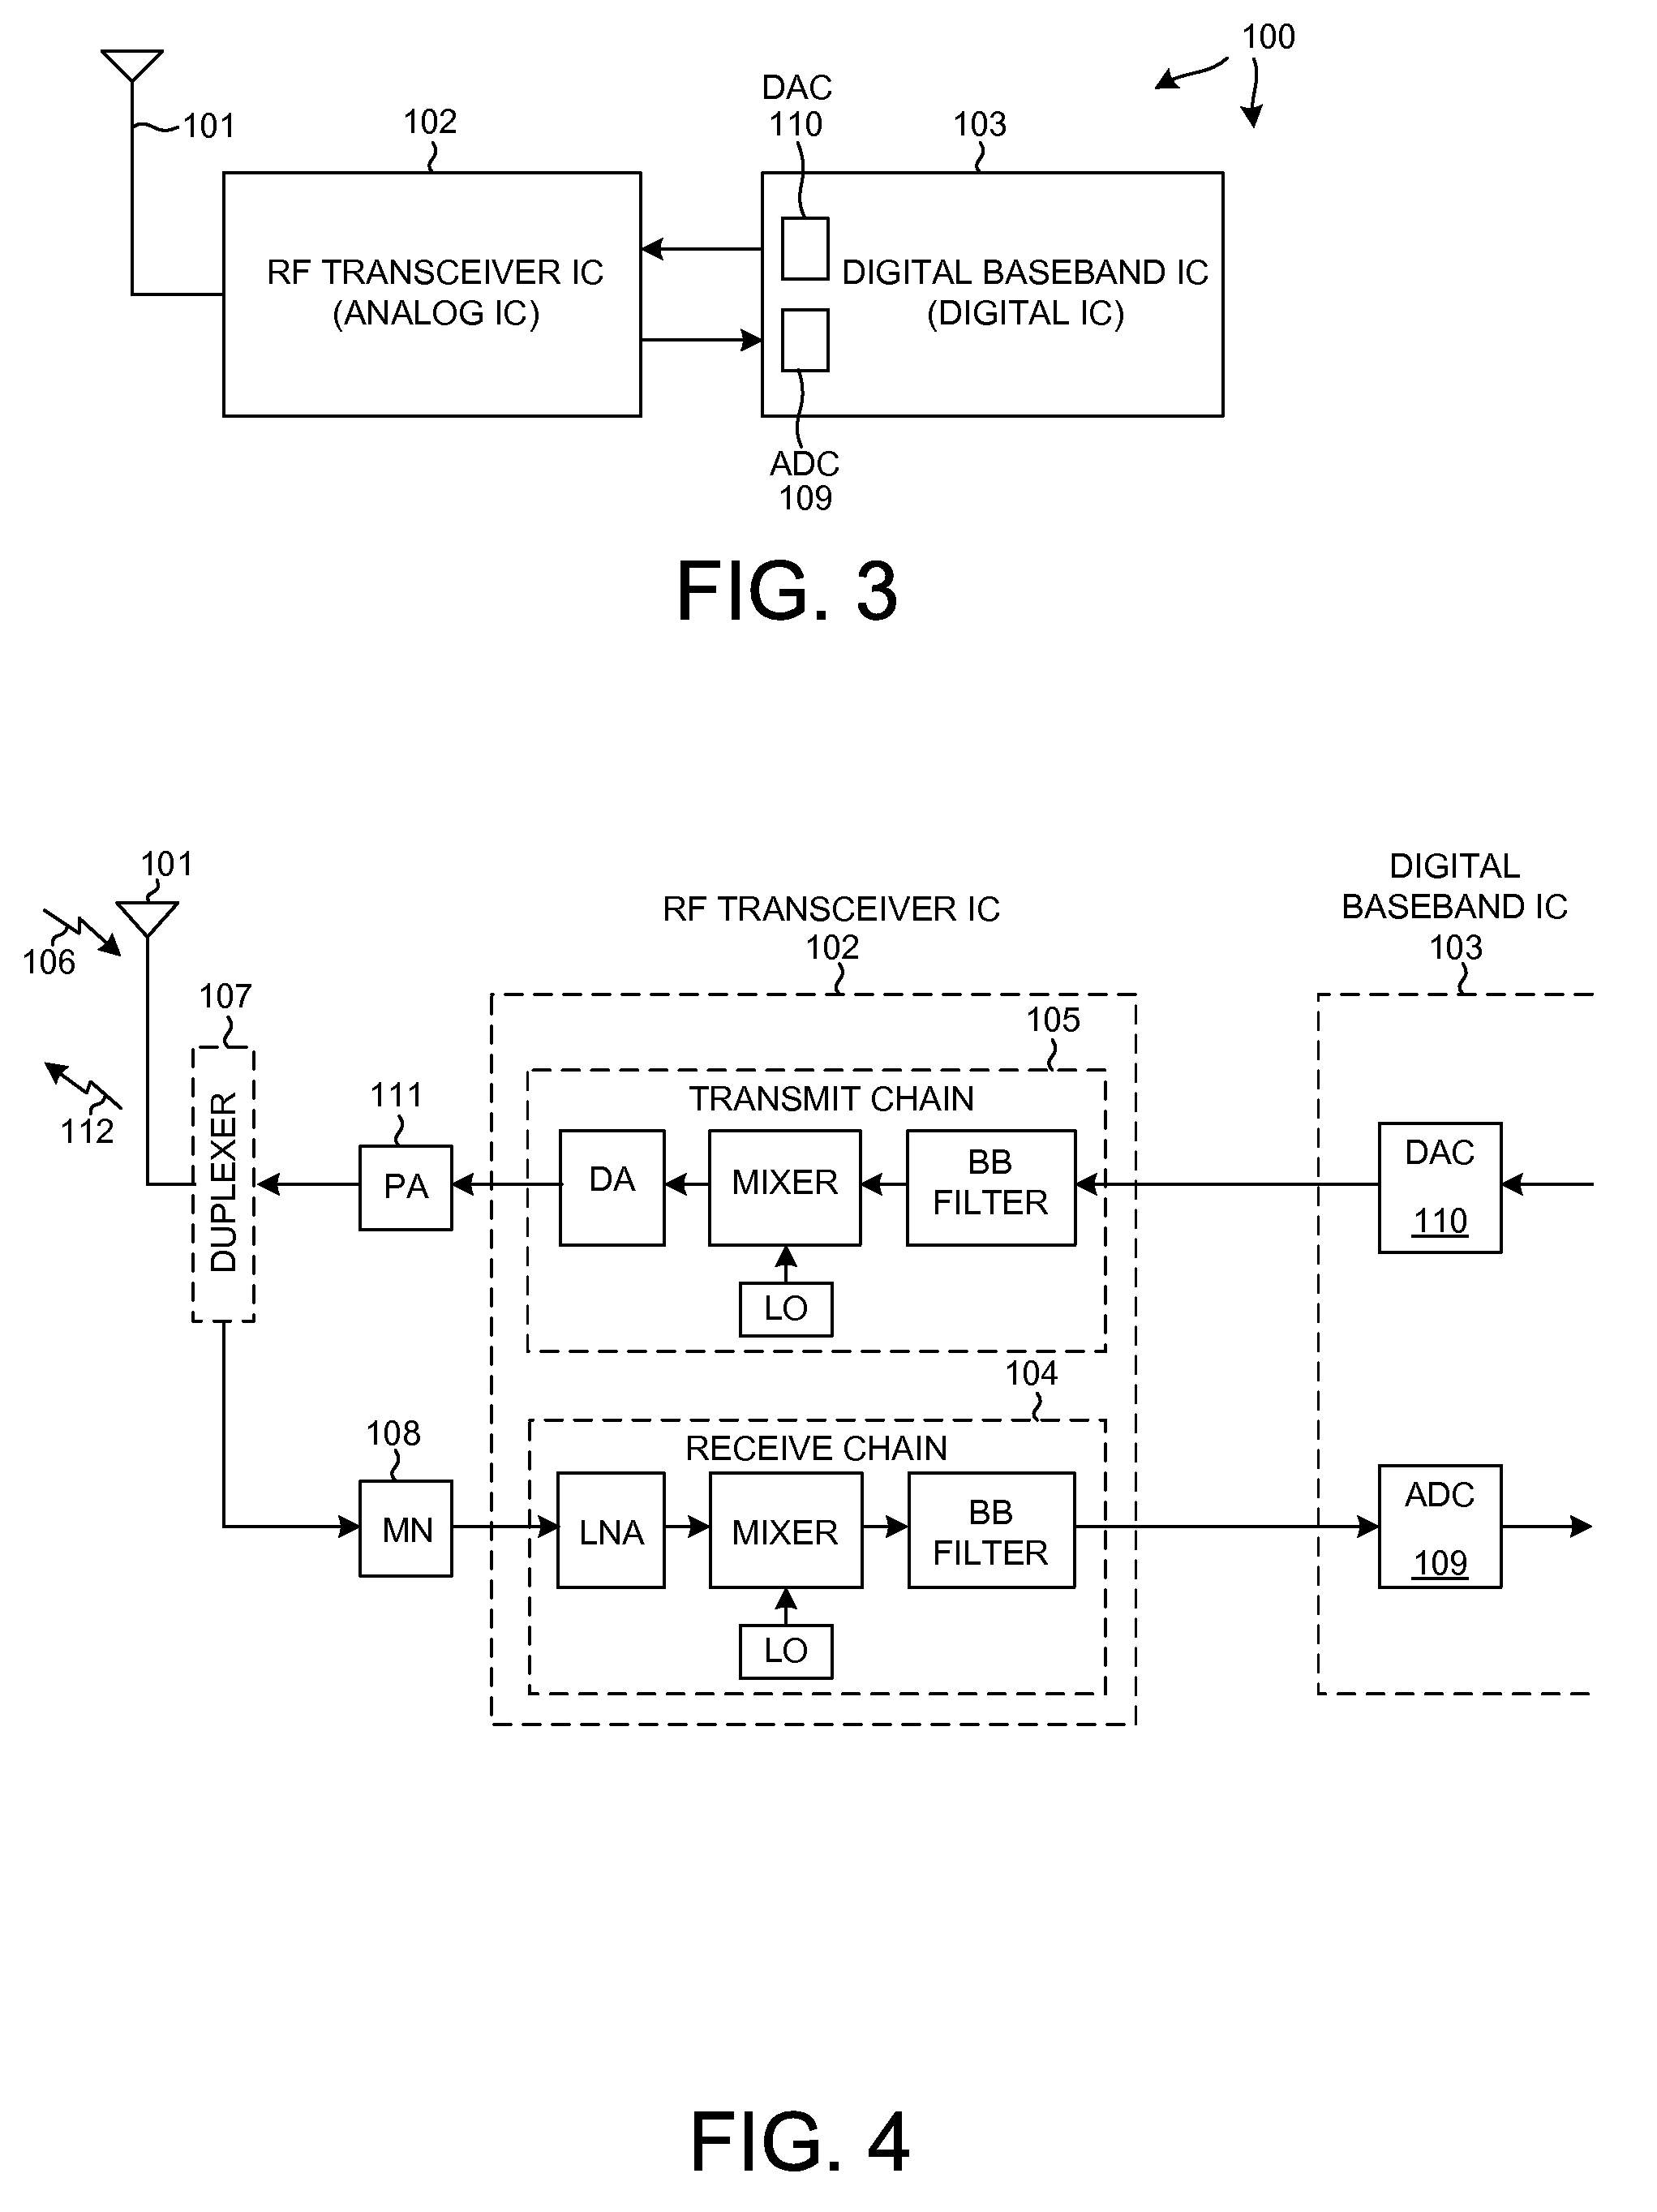 Efficient parallel sub-packet decoding using multiple decoders